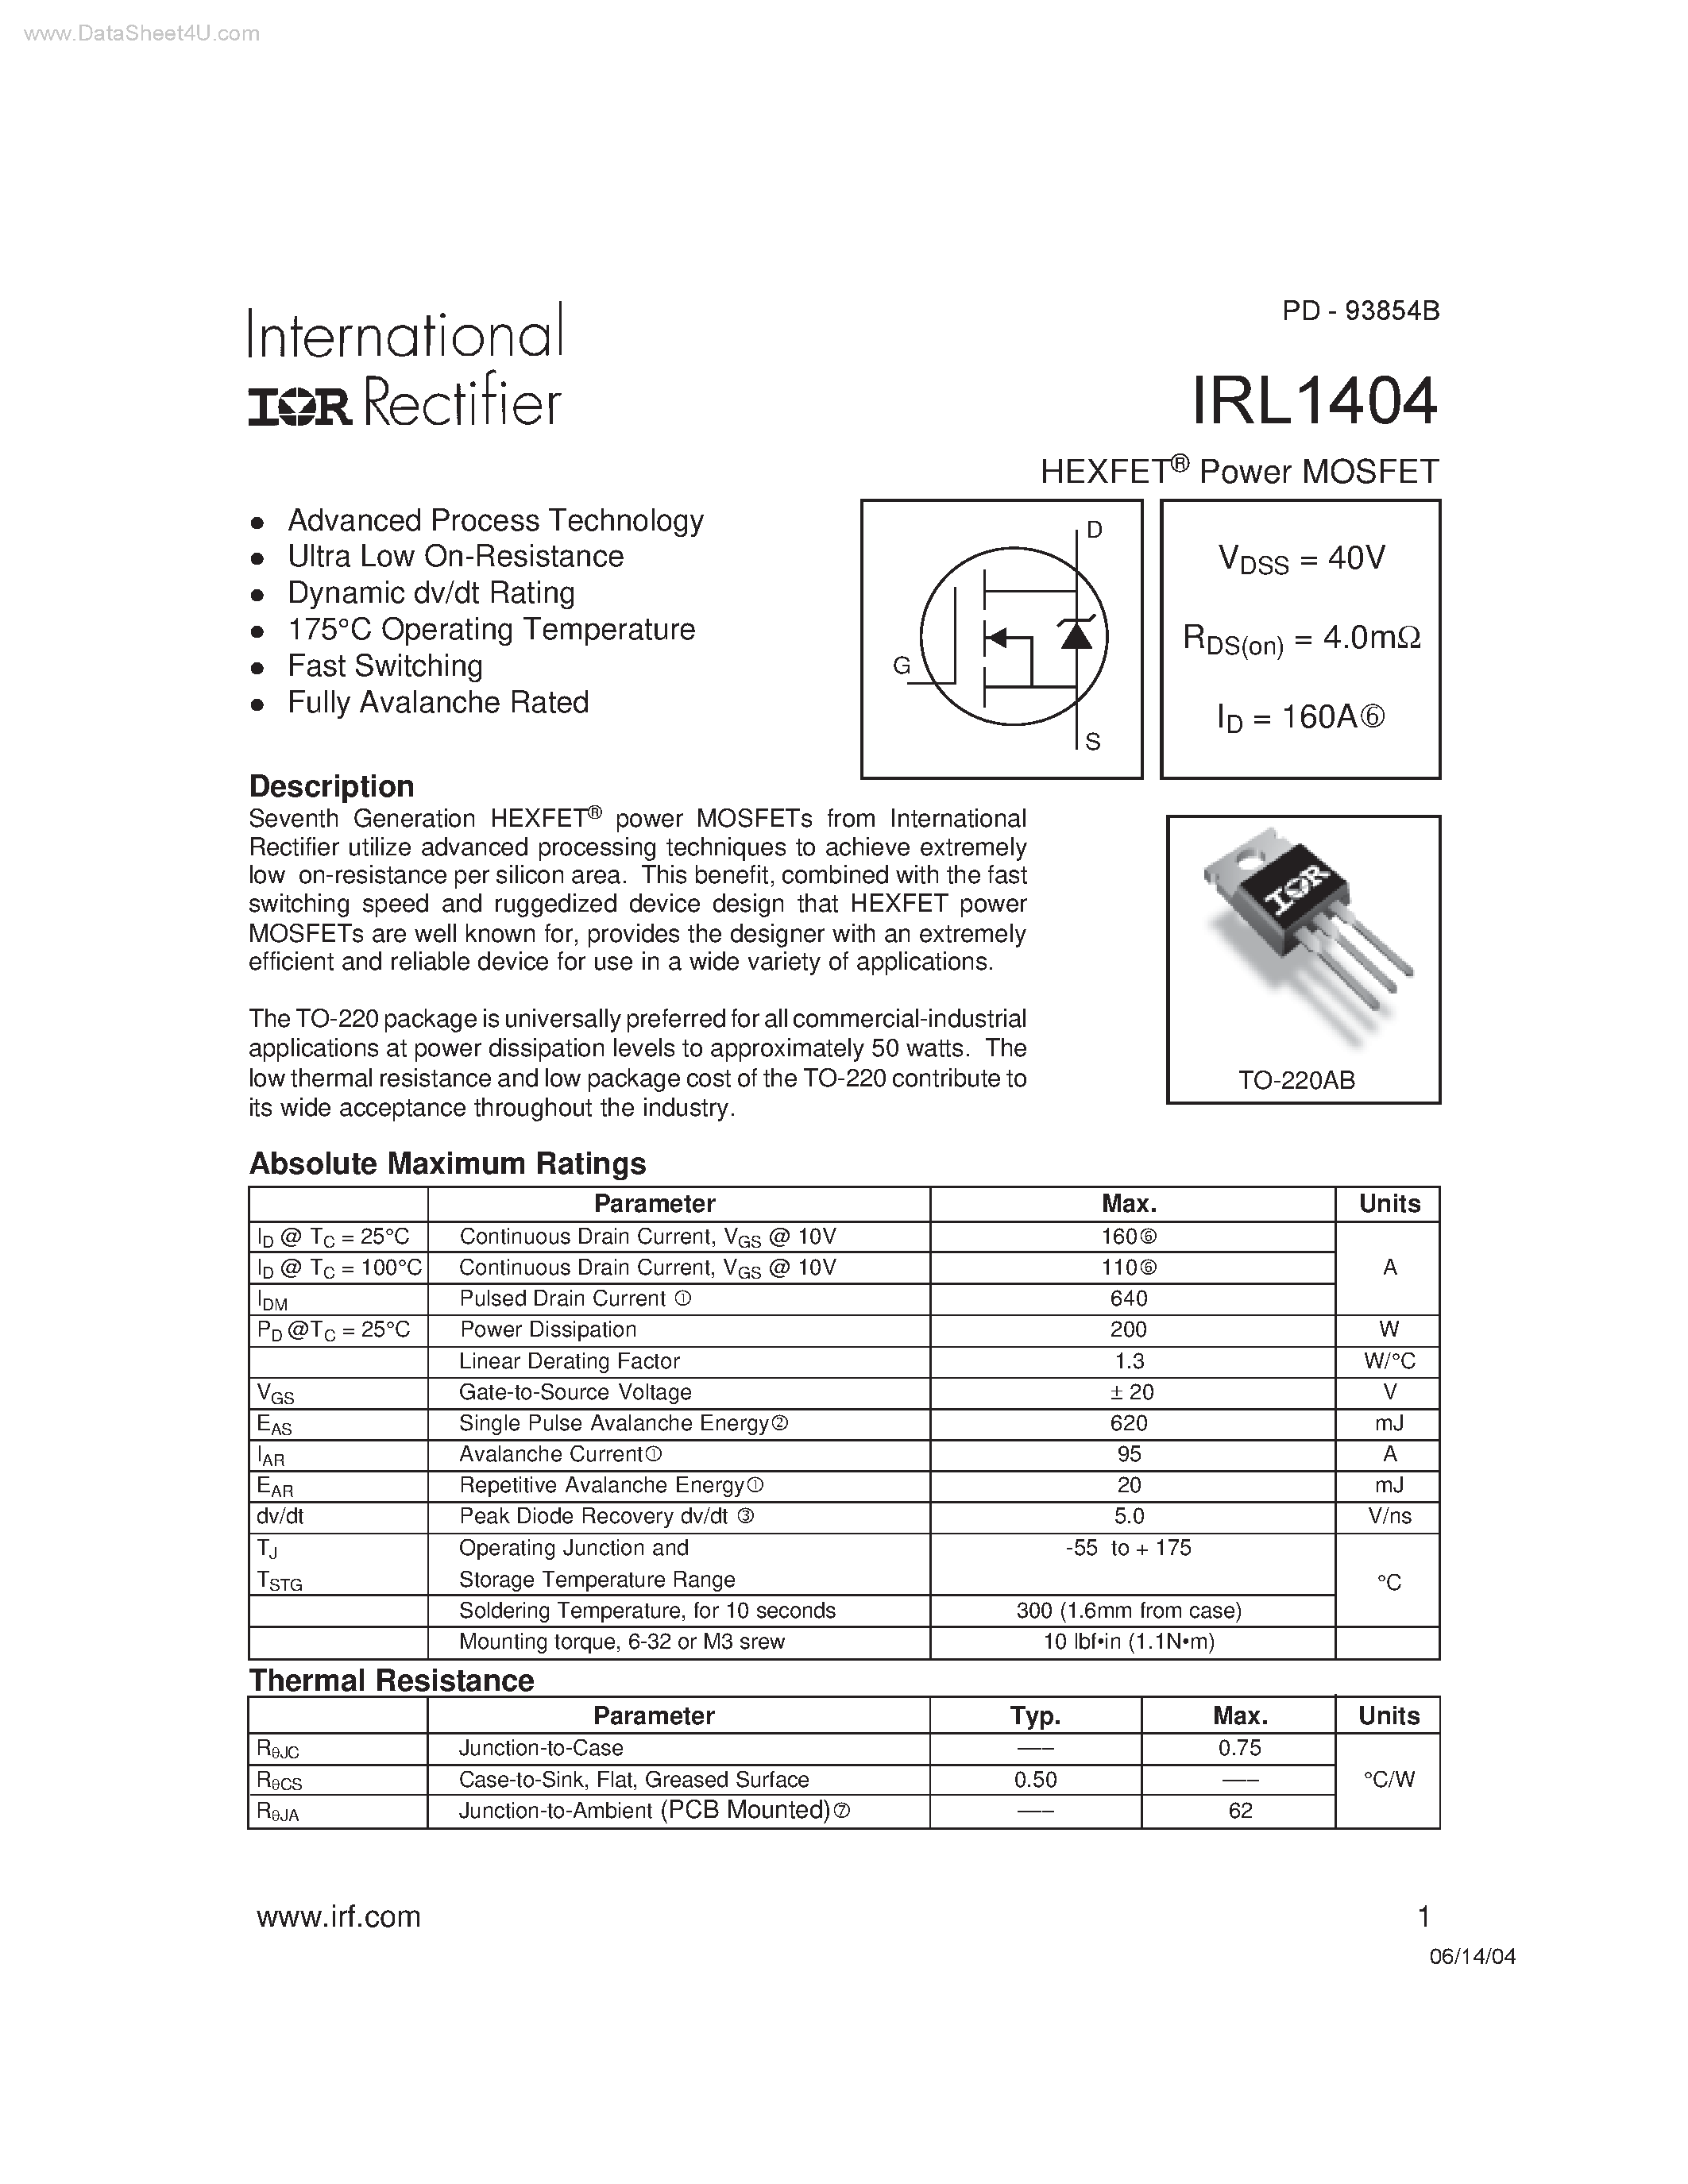 Datasheet IRL1404 - HEXFET Power MOSFET page 1